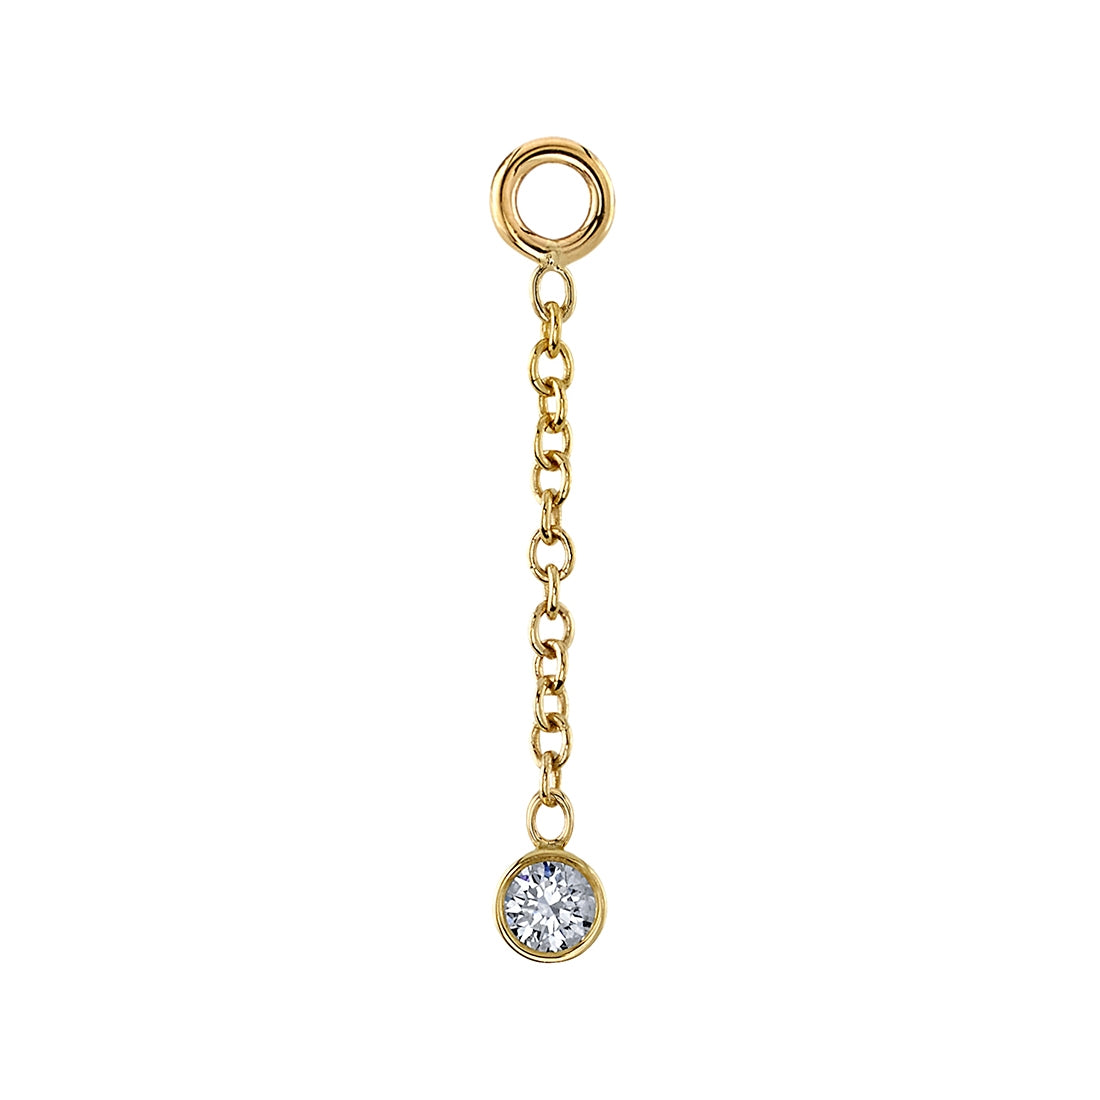 BVLA's "Bezel Dangle Charm" in 14k Yellow gold with a CZ Bezel at the bottom of a link style chain